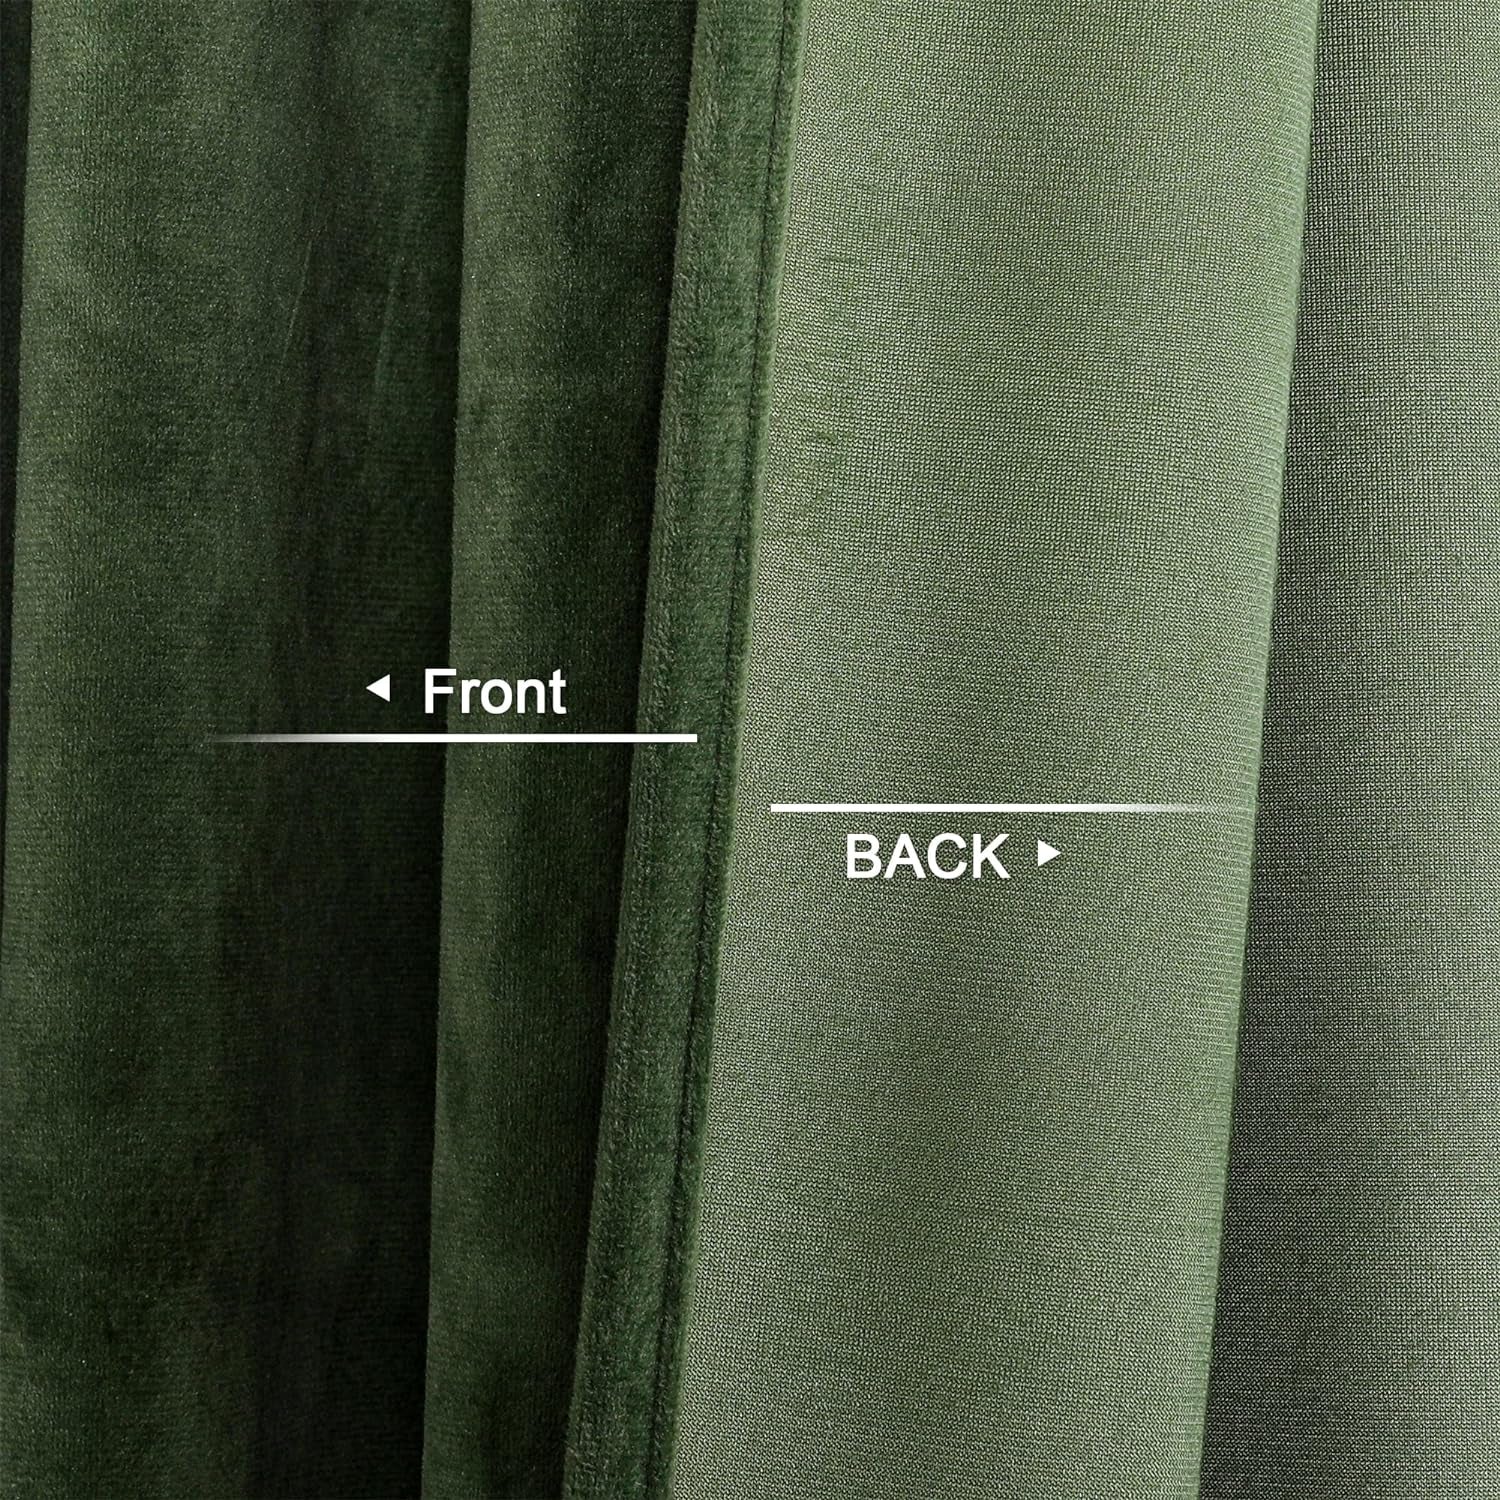 Benedeco Green Velvet Curtains for Bedroom Window, Super Soft Luxury Drapes, Room Darkening Thermal Insulated Rod Pocket Curtain for Living Room, W52 by L84 Inches, 2 Panels  Benedeco   